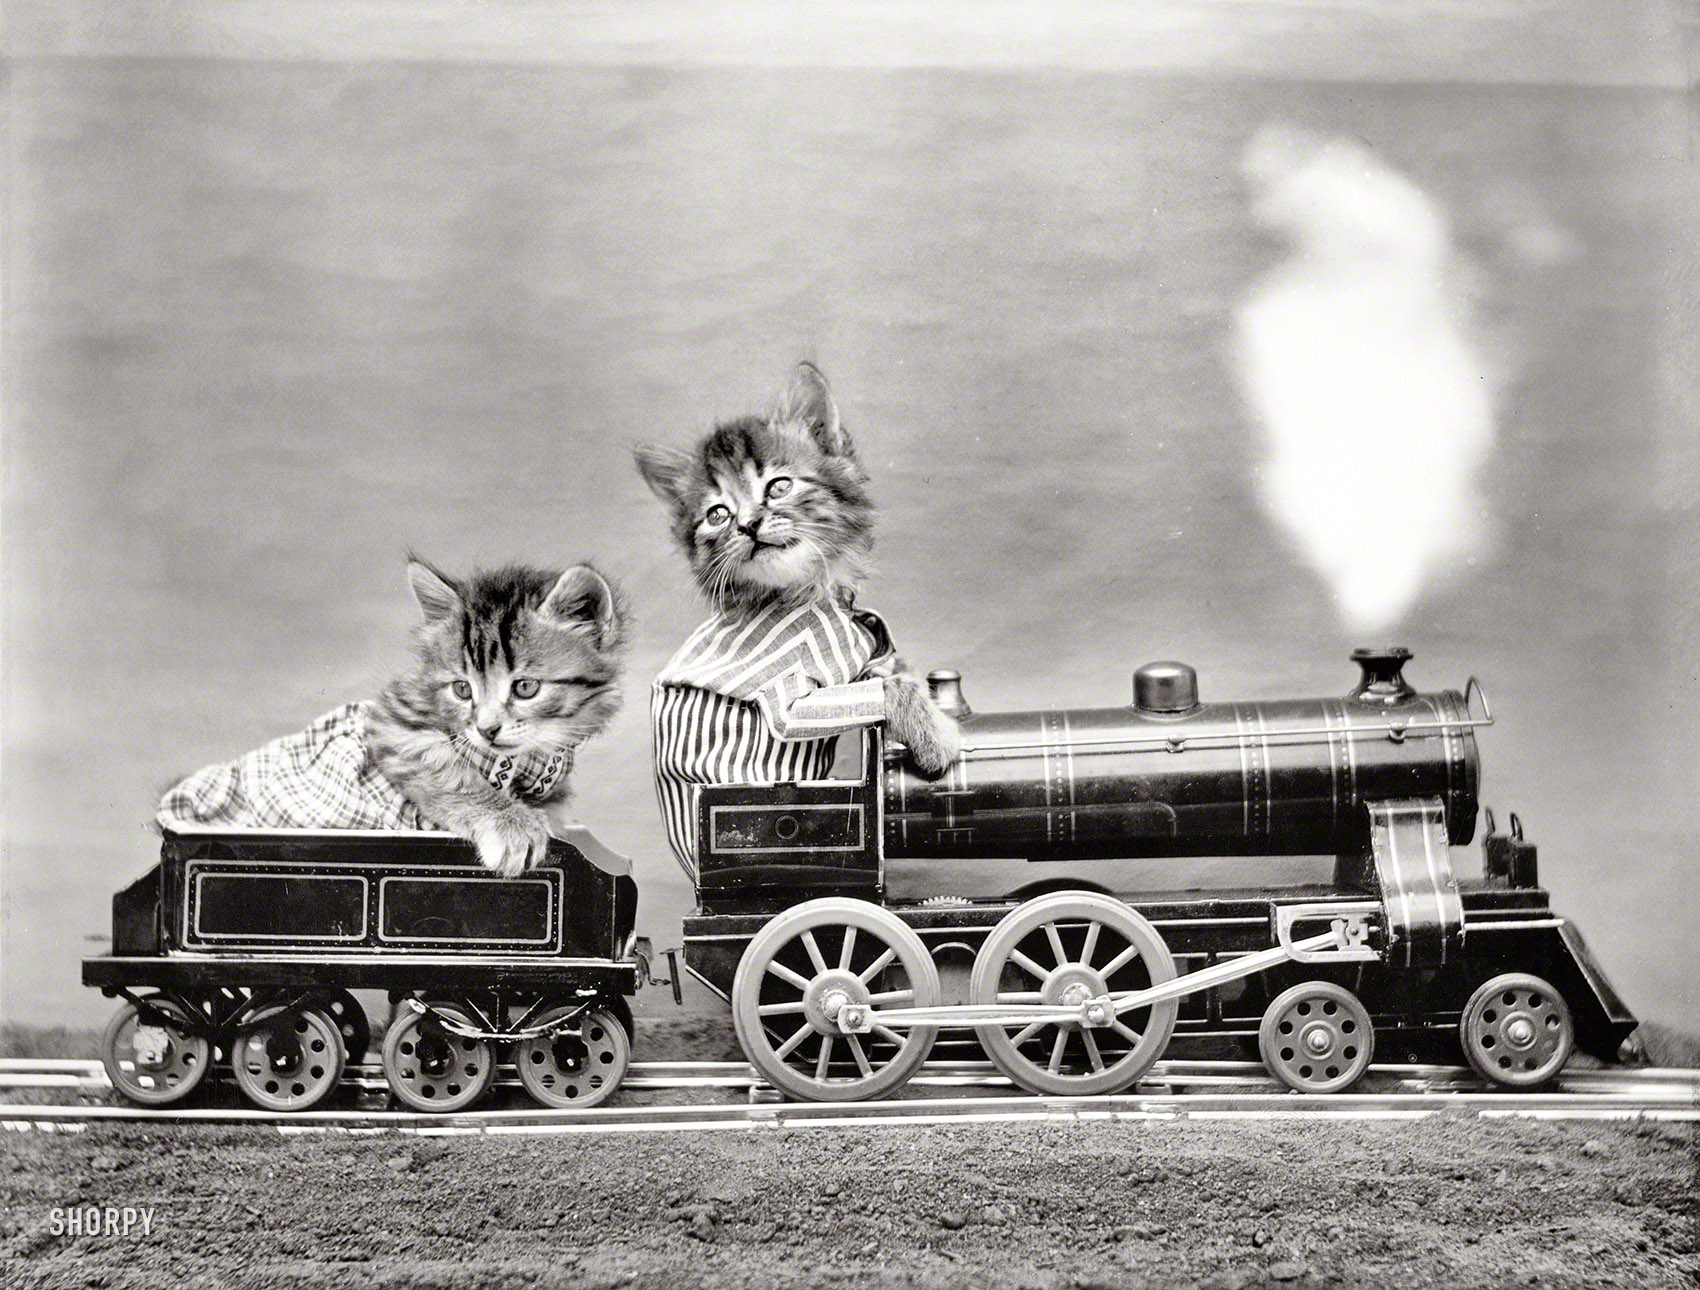 1914. "Kittens in costume riding miniature locomotive." And it seems like just yesterday (or last week) that these guys were being pushed around in a stroller -- they grow up so fast. Photo by Harry W. Frees. View full size.